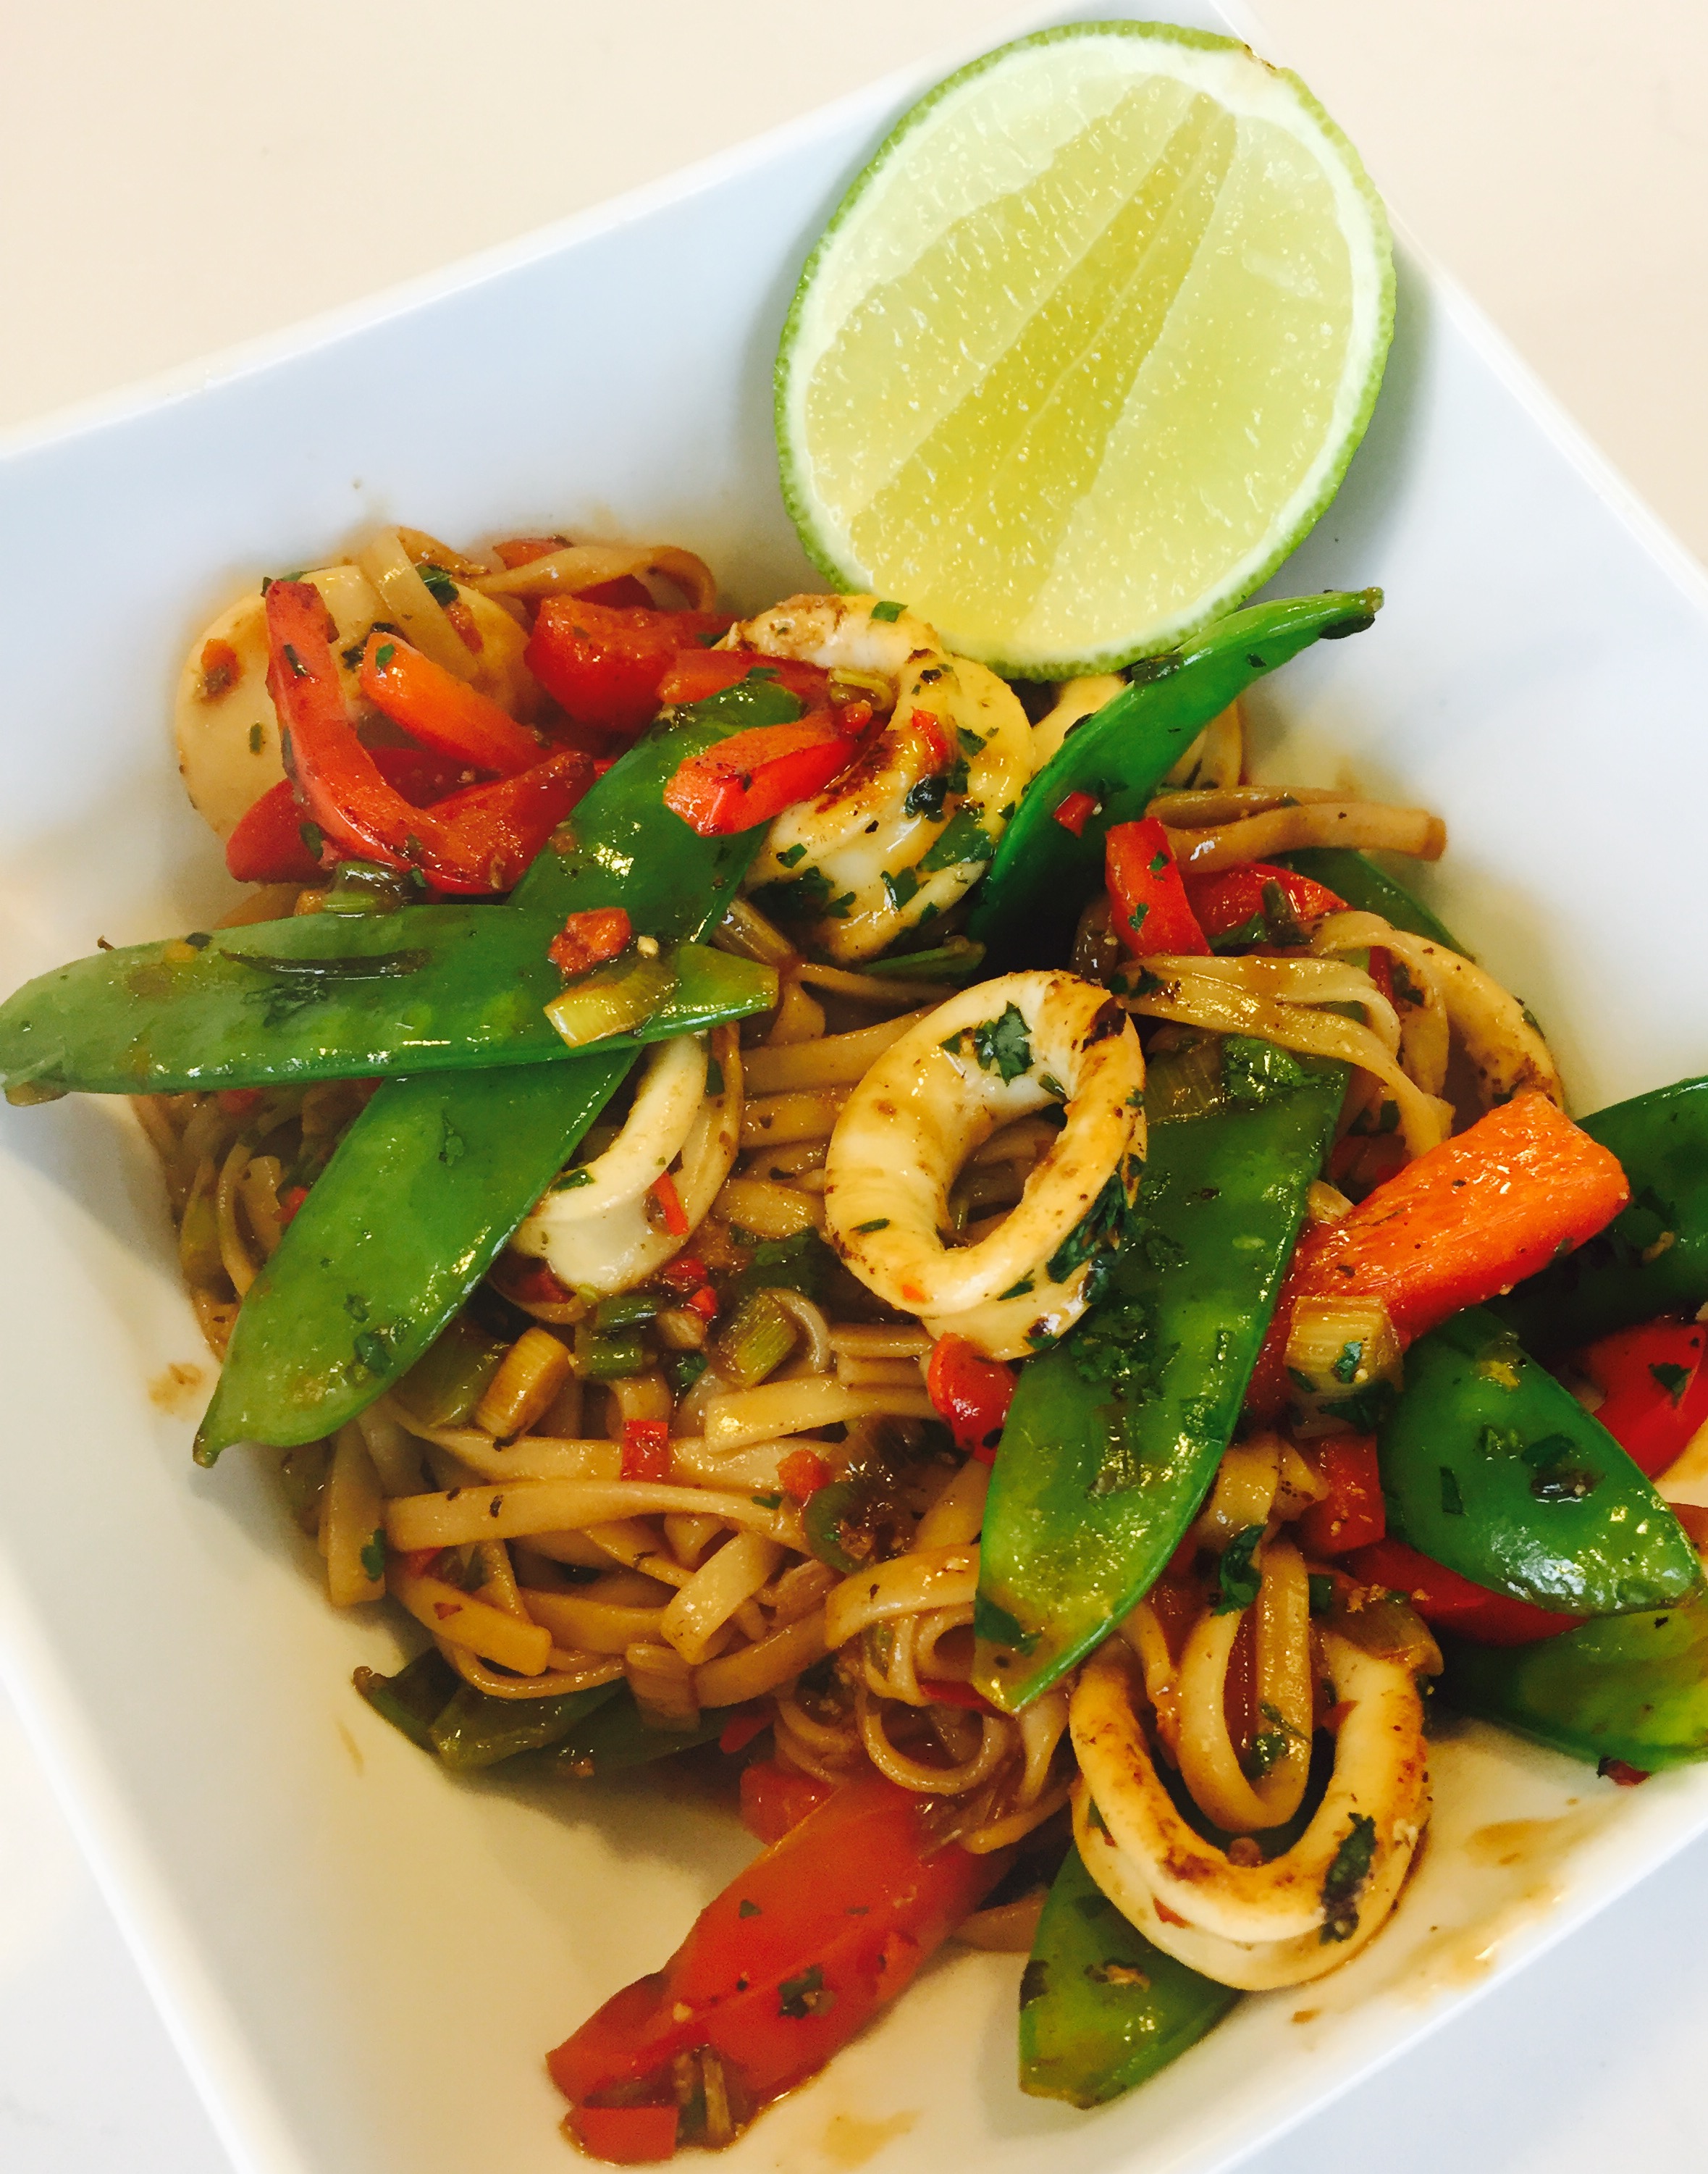 April Fish of the Month - Spicy Squid Stir fry - The Green Apron